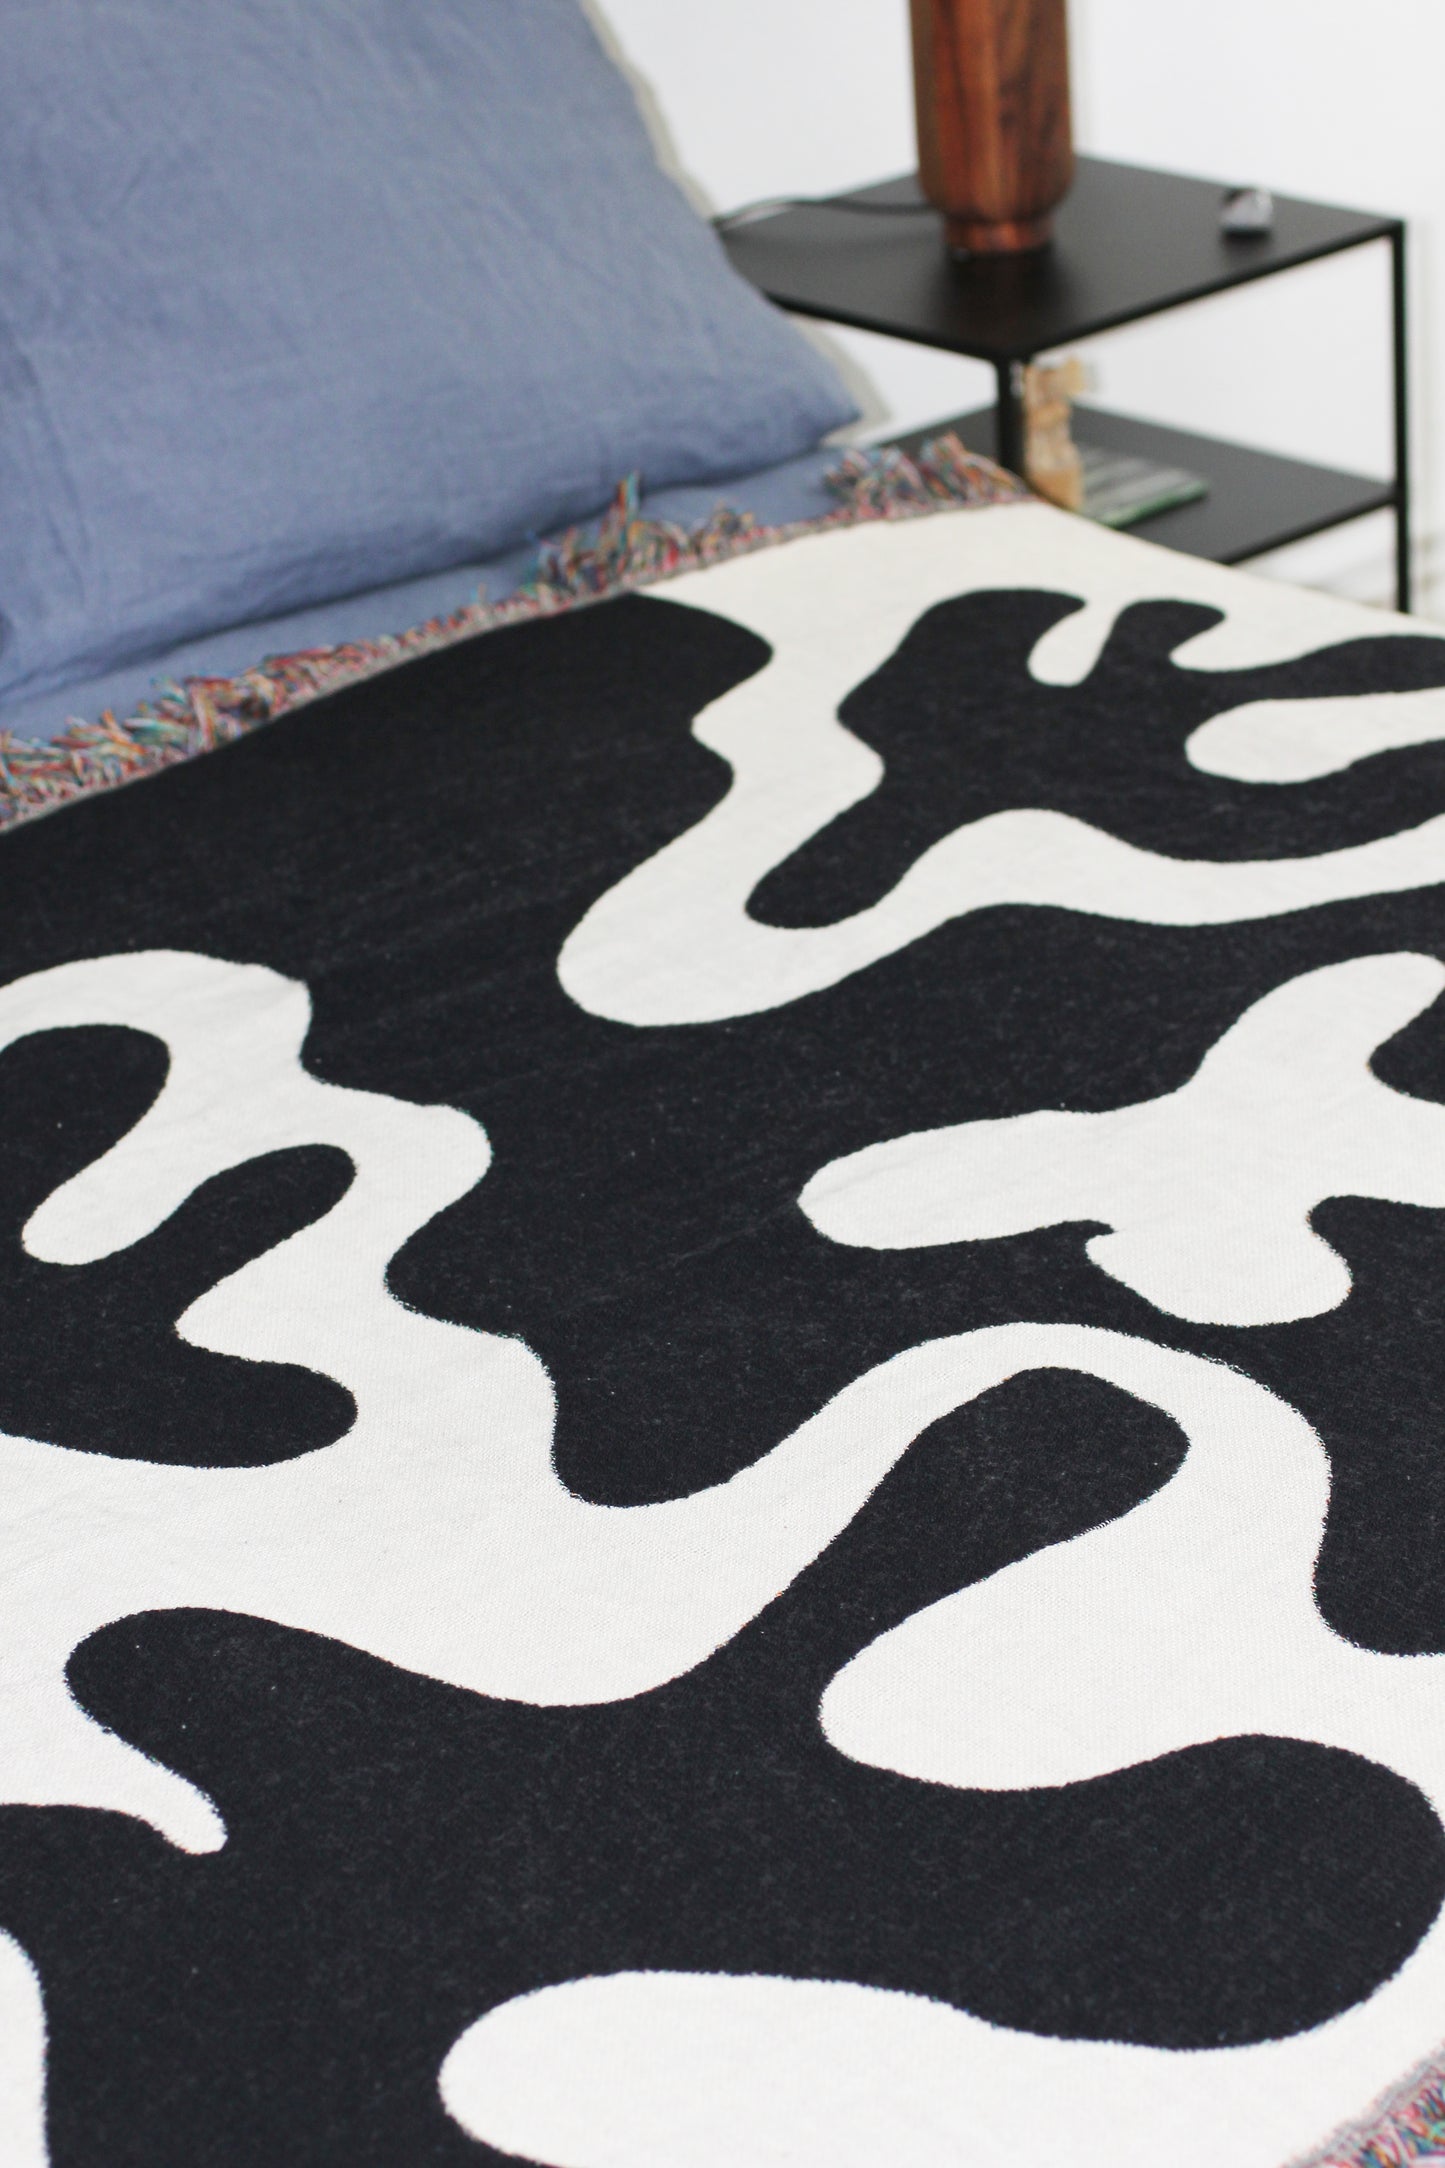 Dancing Shapes Woven Throw Blanket